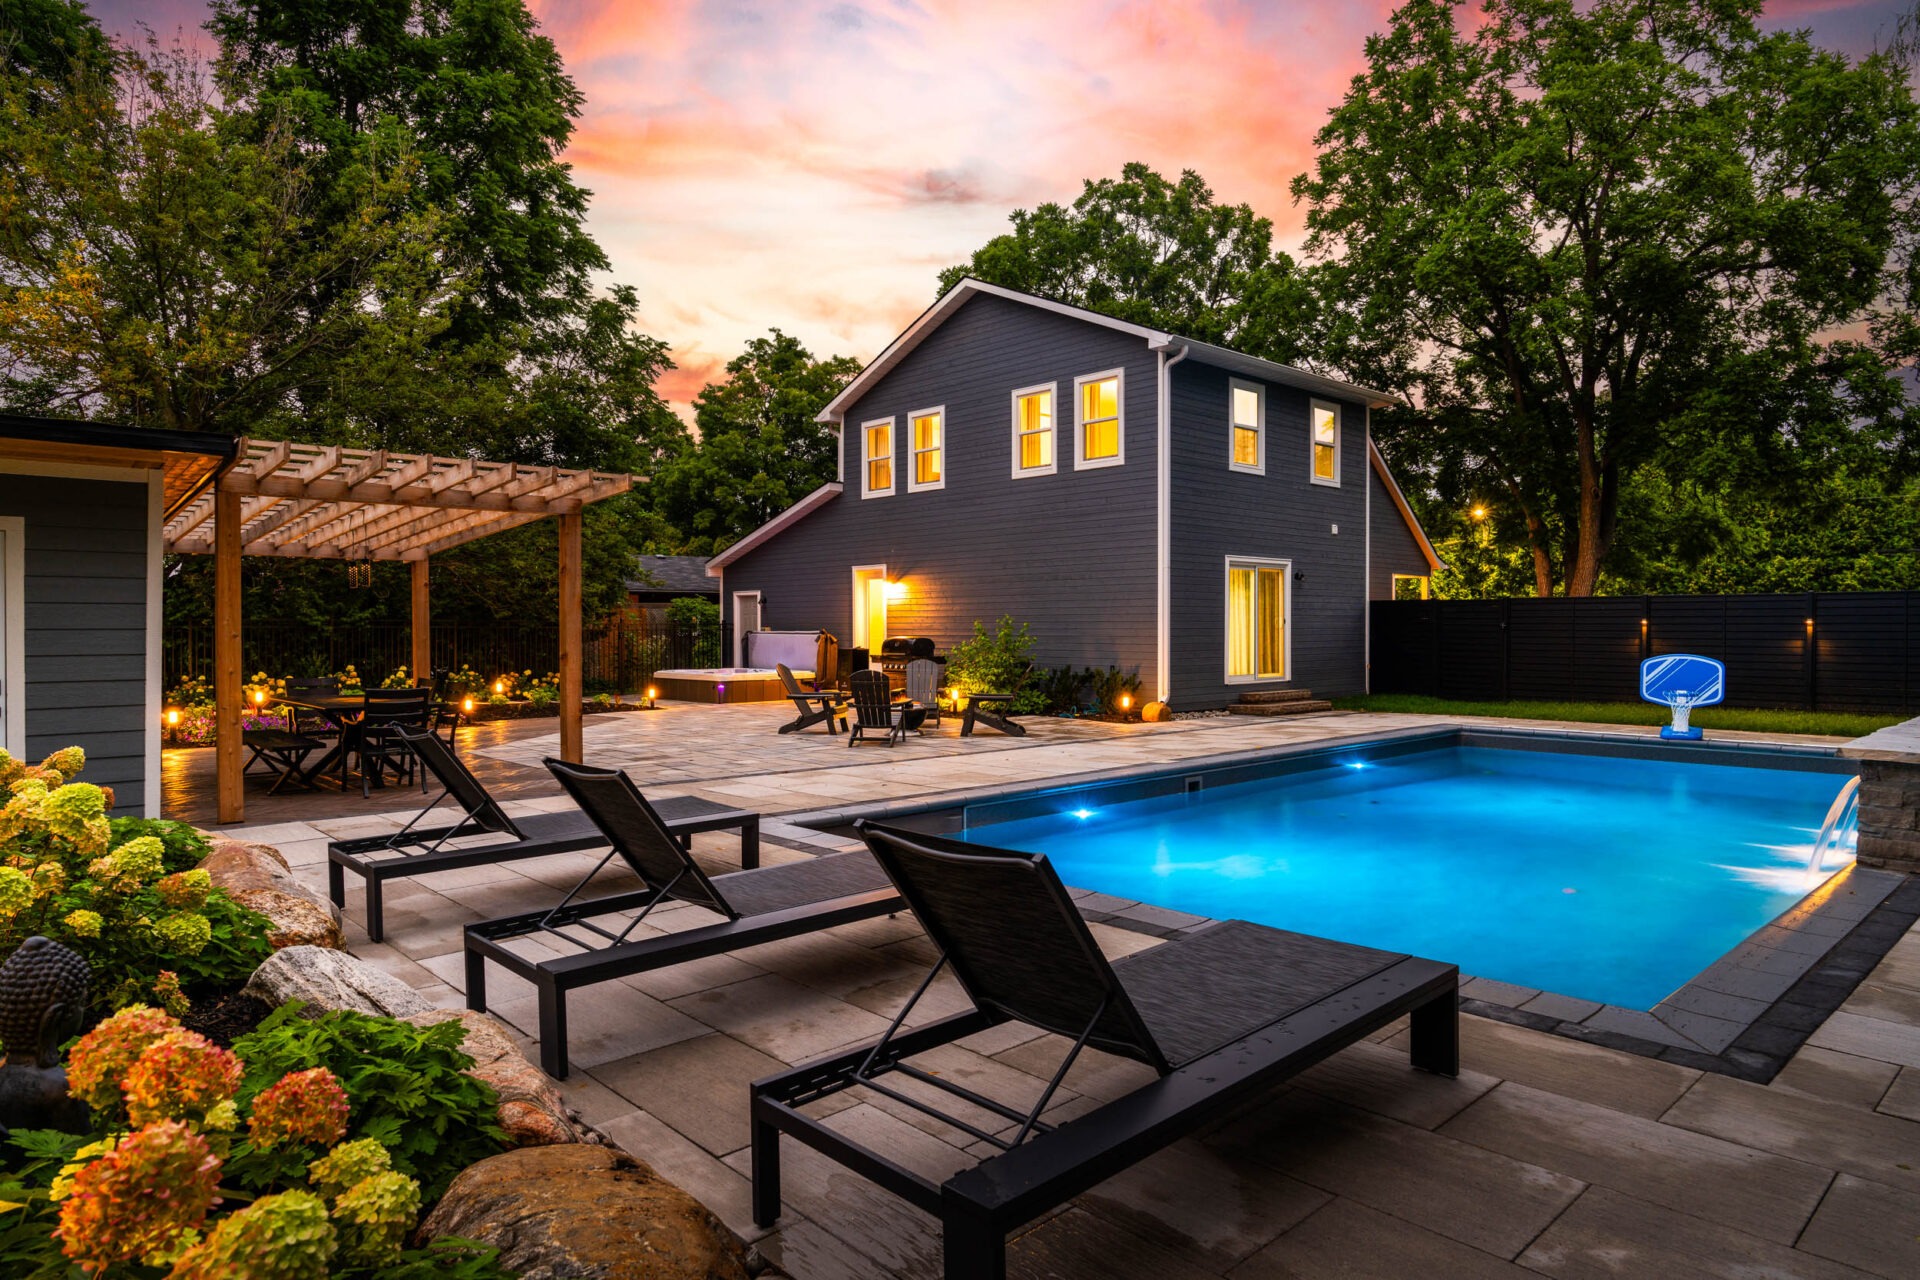 A serene backyard at dusk featuring an illuminated swimming pool, patio, pergola with hanging lights, lounging chairs, landscaping, and a two-story dark-colored house.